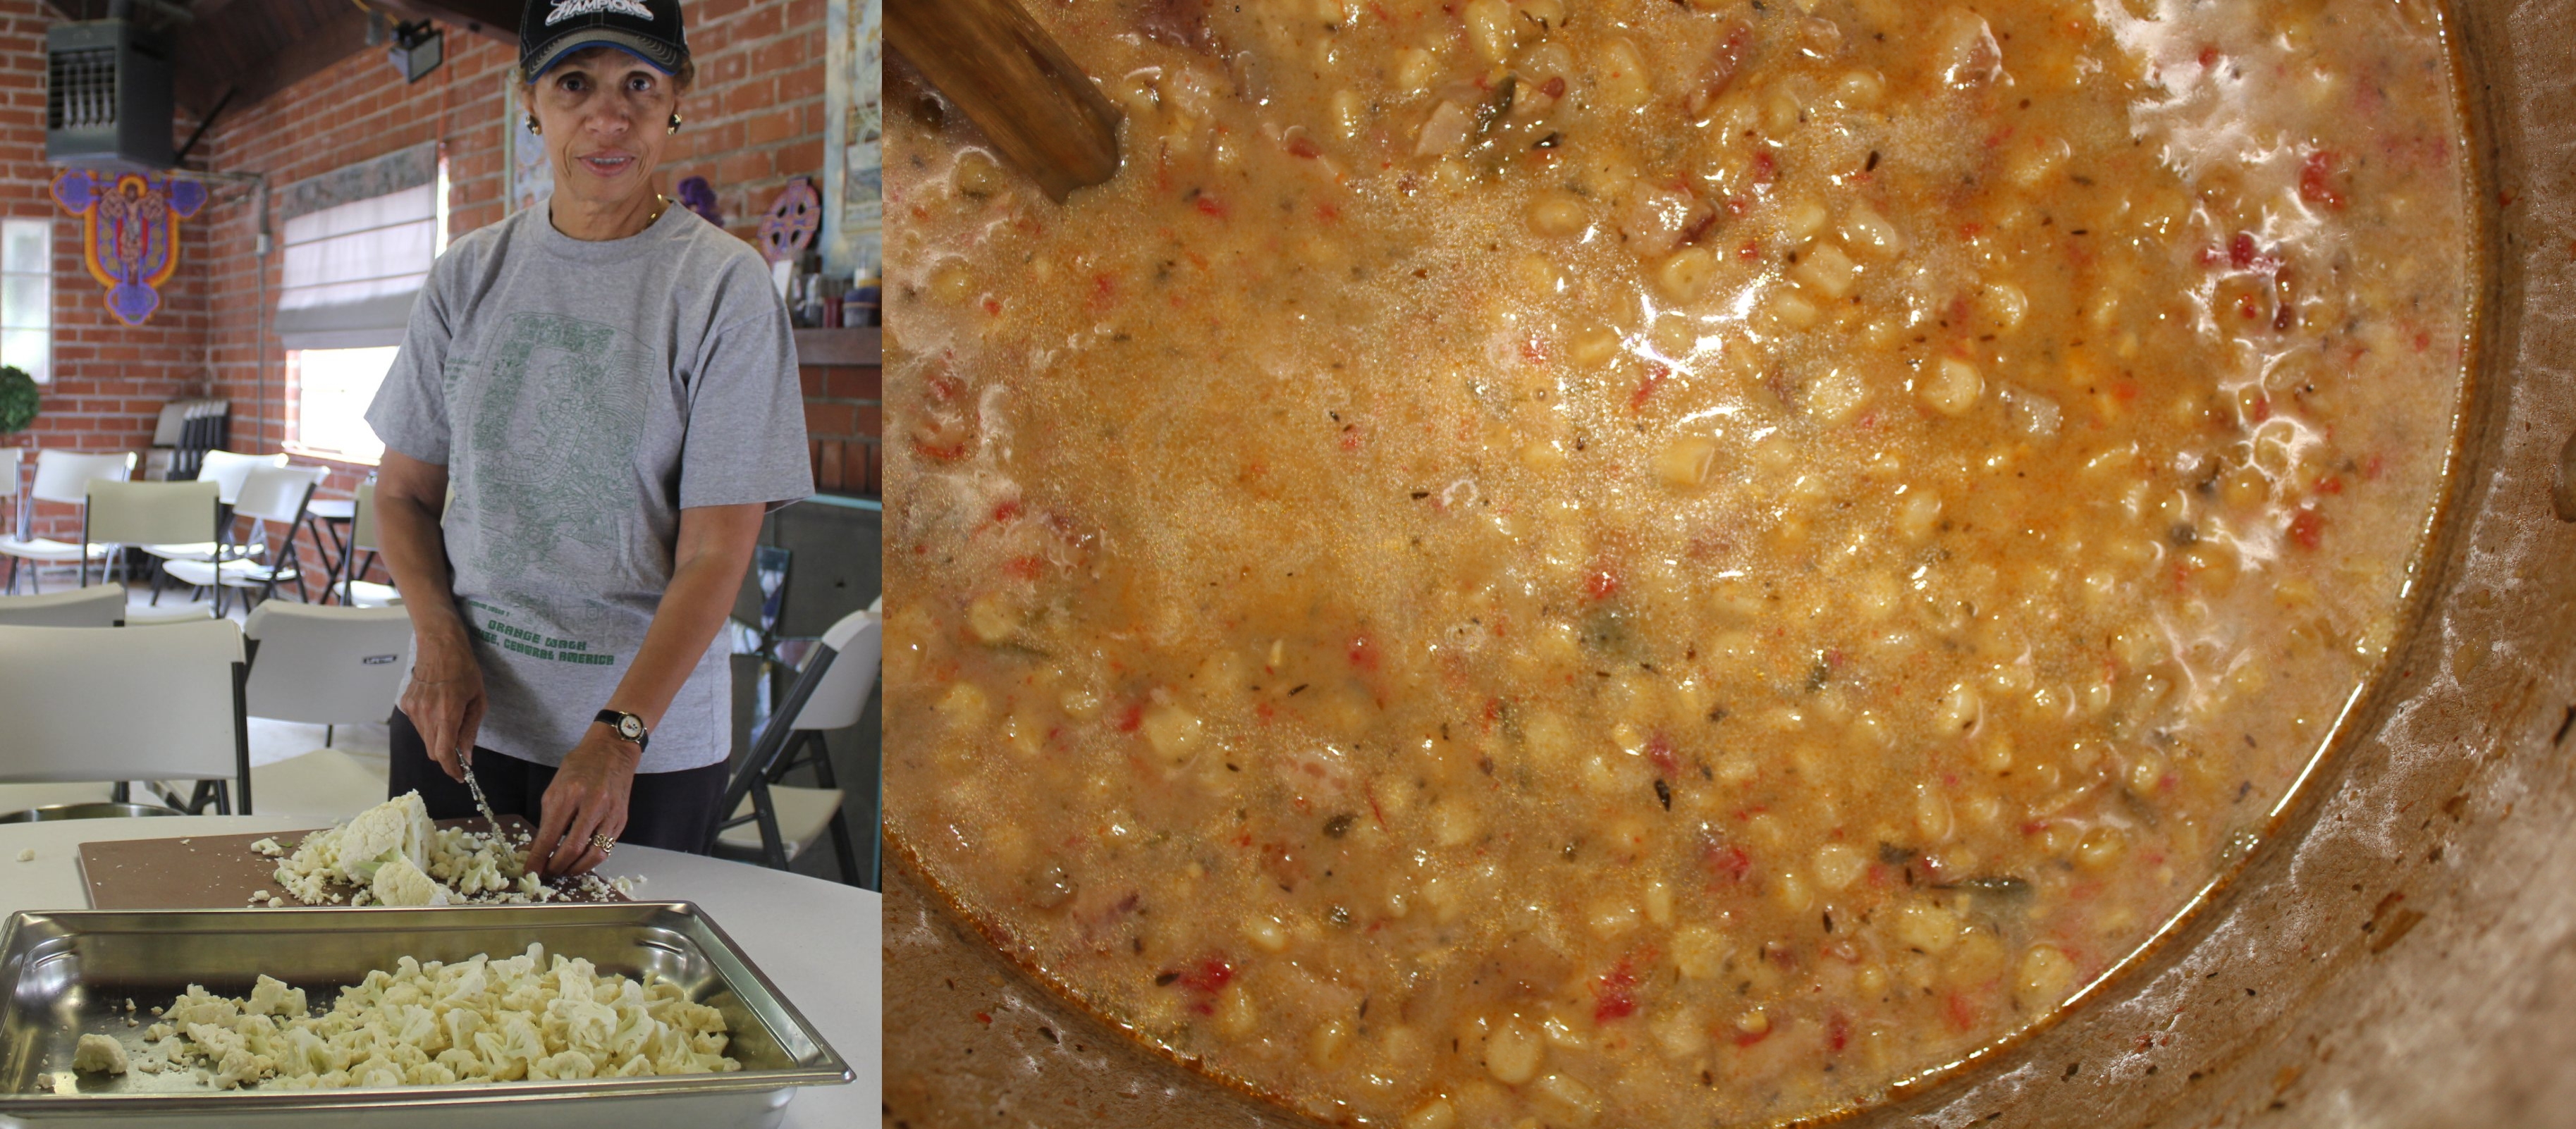 Gerry with cauliflower and our Corn Chowder-full strength